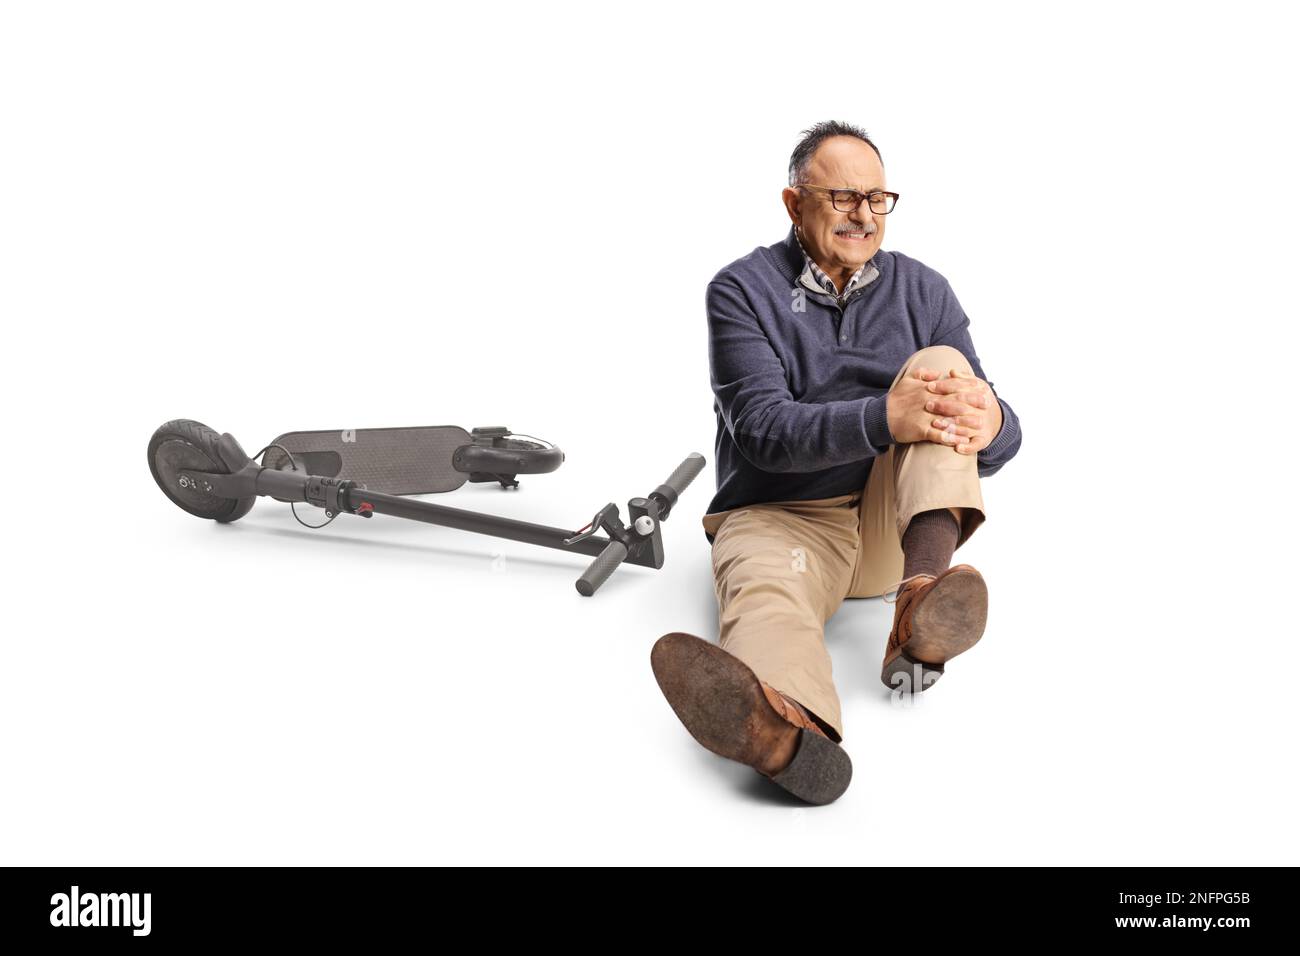 Mature man with an electric scooter holding his painful knee and sitting on the ground isolated on white background Stock Photo